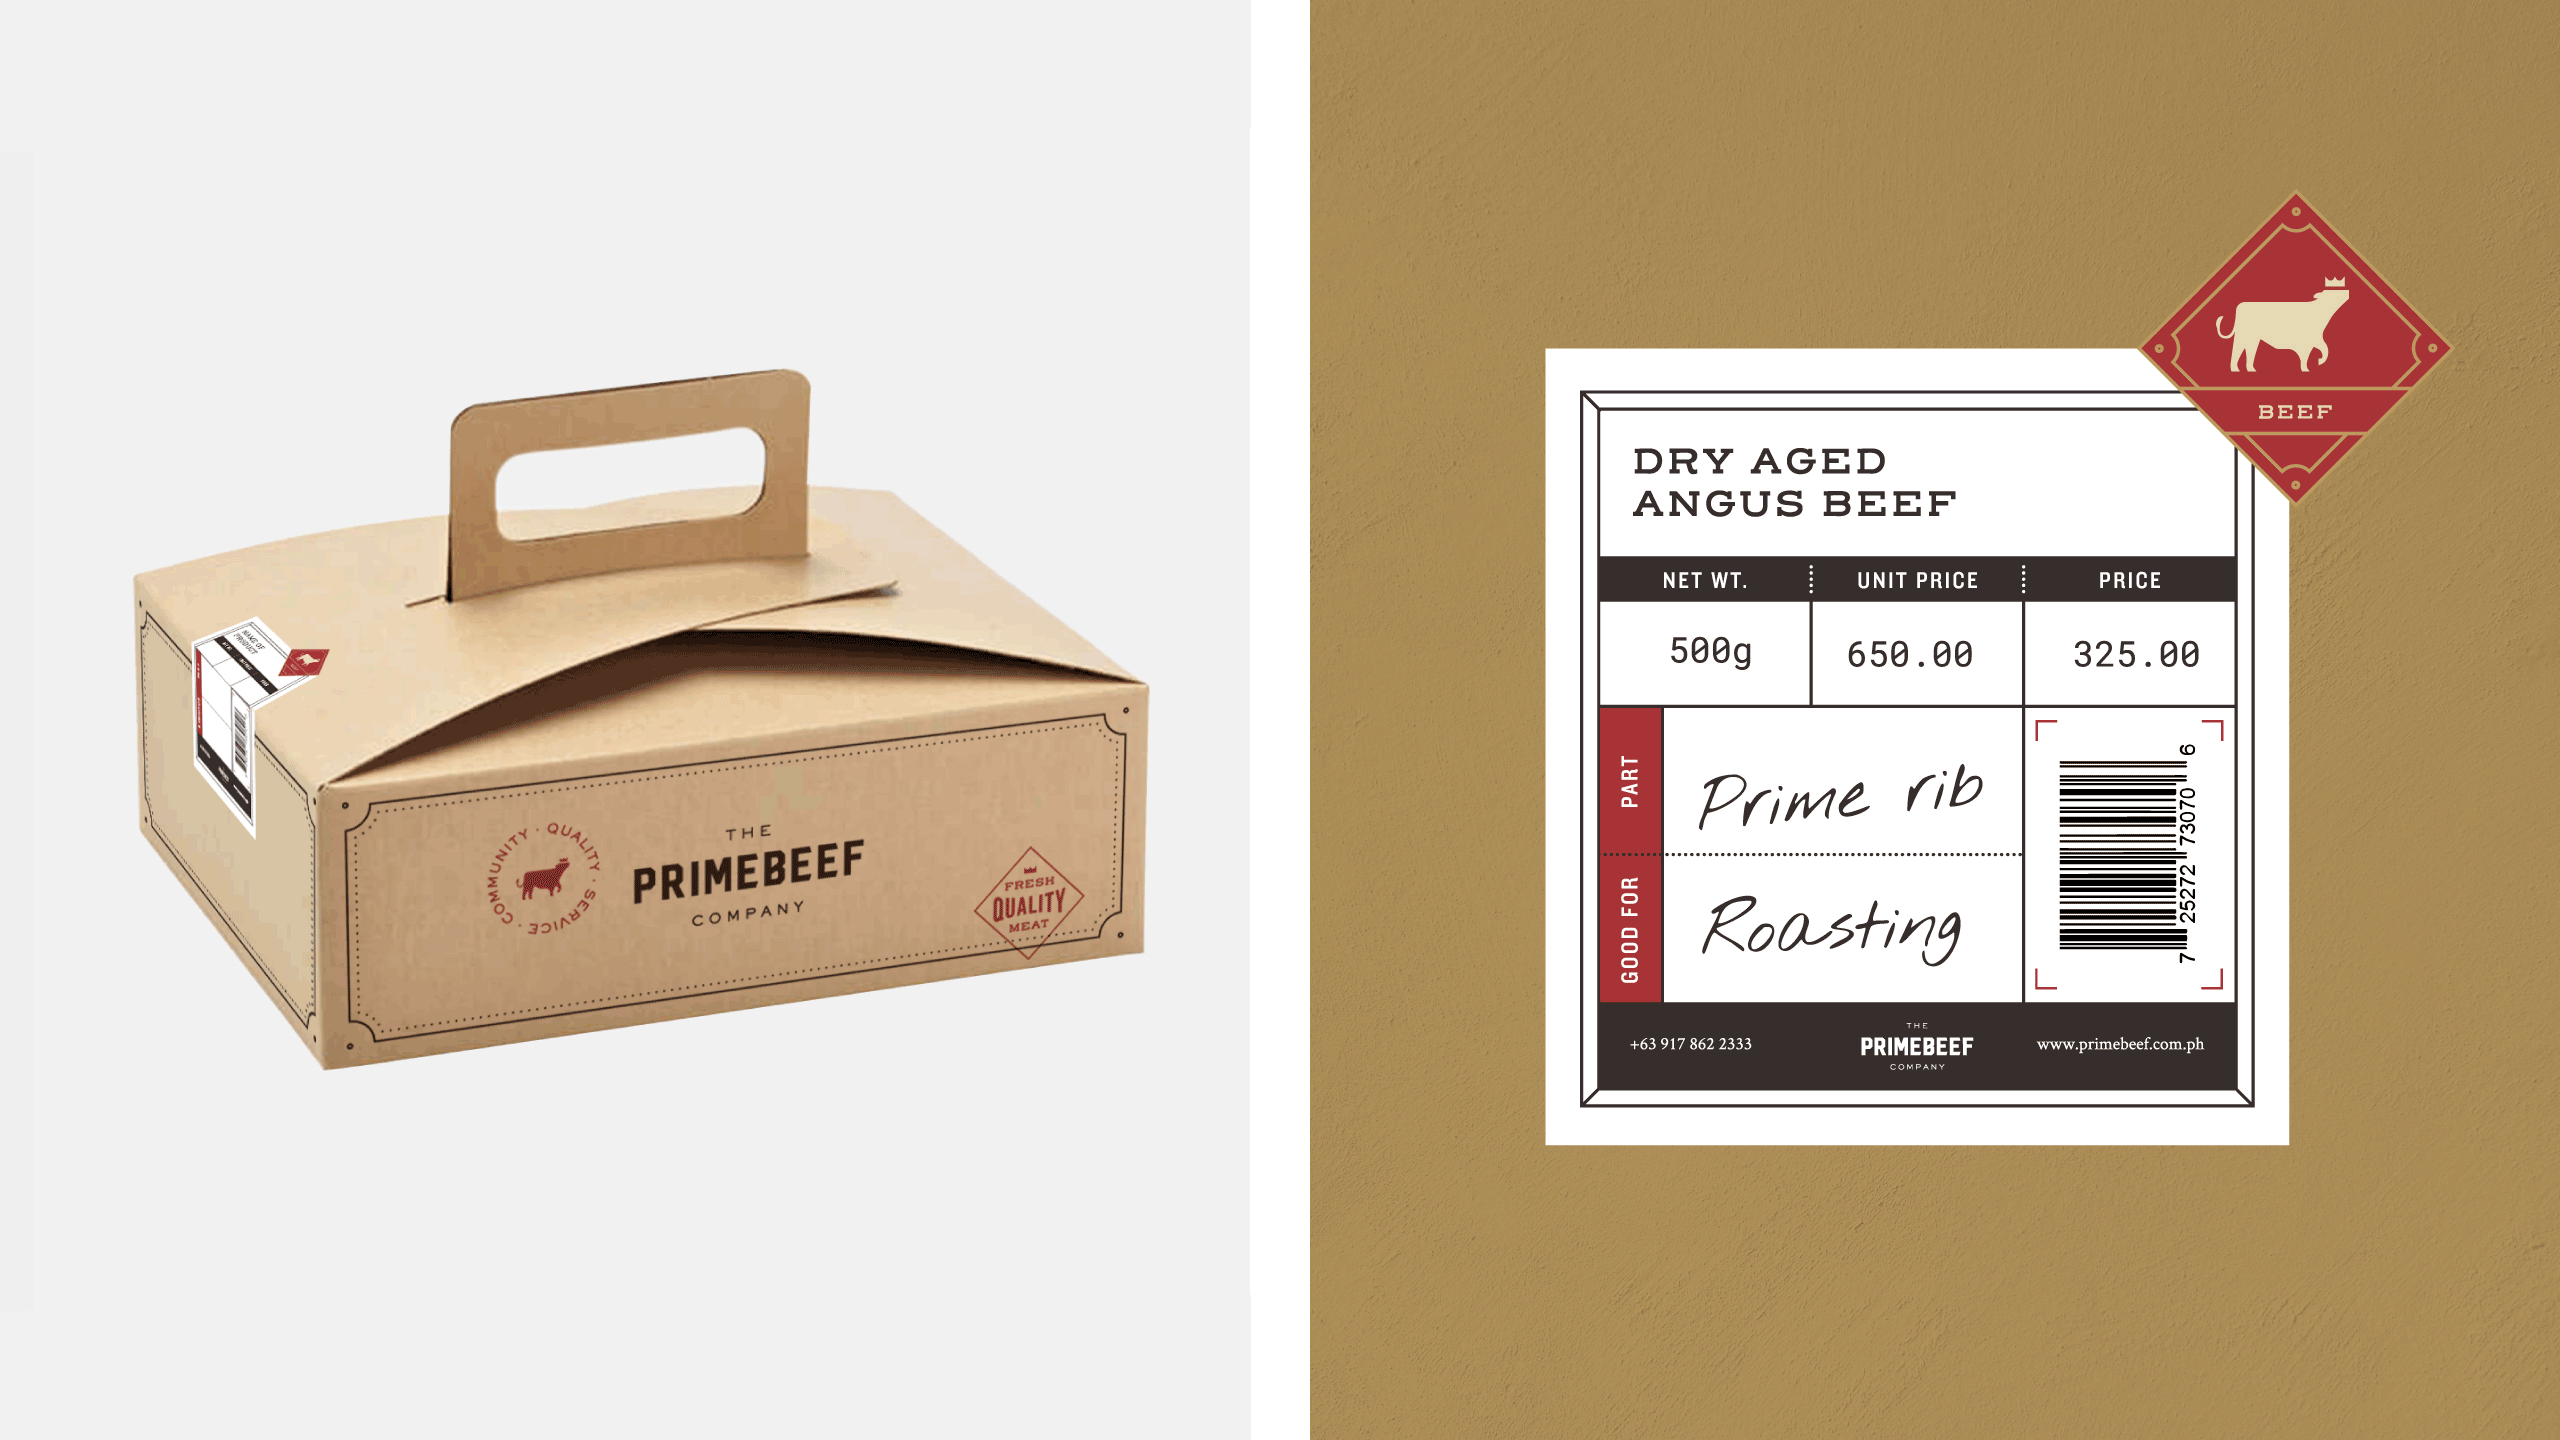 Customized box with handle packaging with informative sticker for Filipino meat brand Primebeef